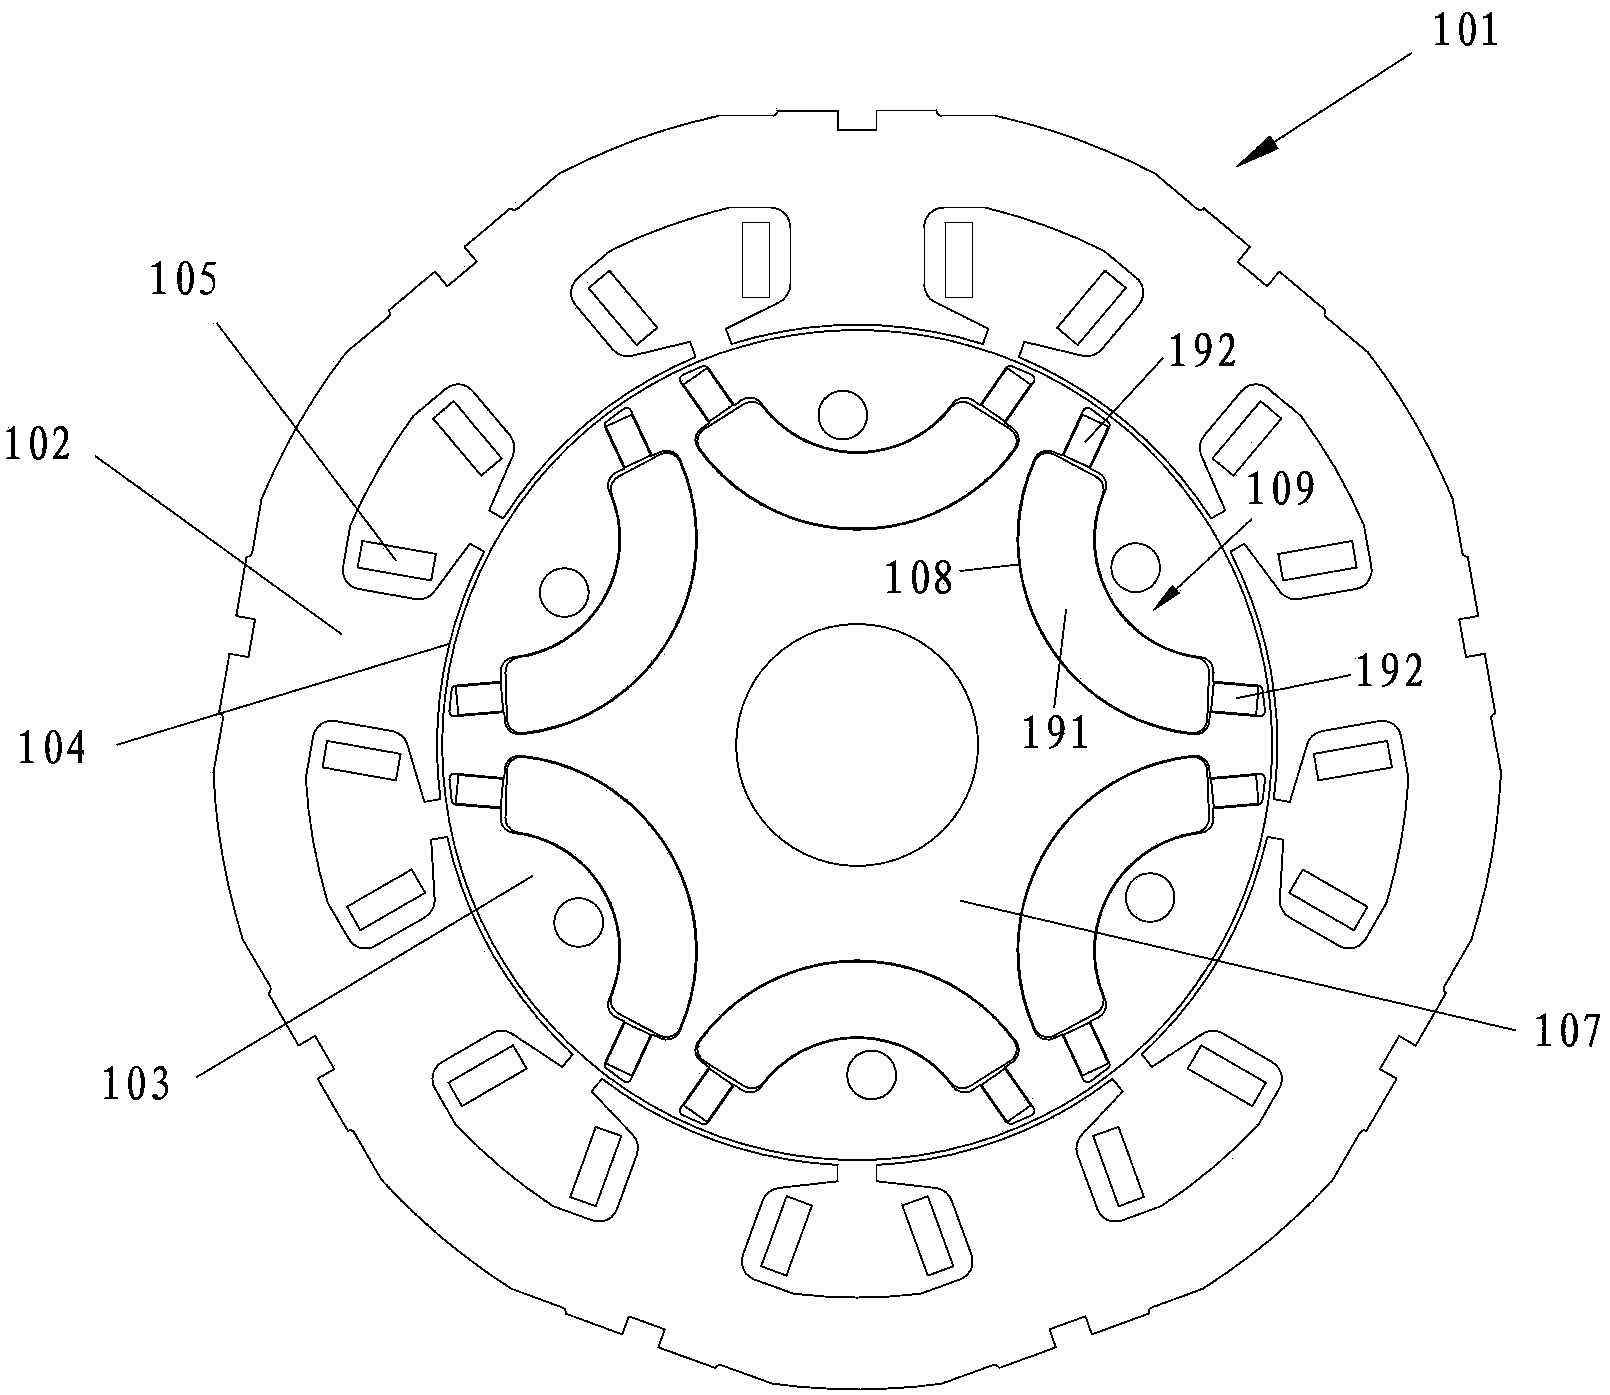 Hybrid permanent magnet rotor assembly and corresponding motor